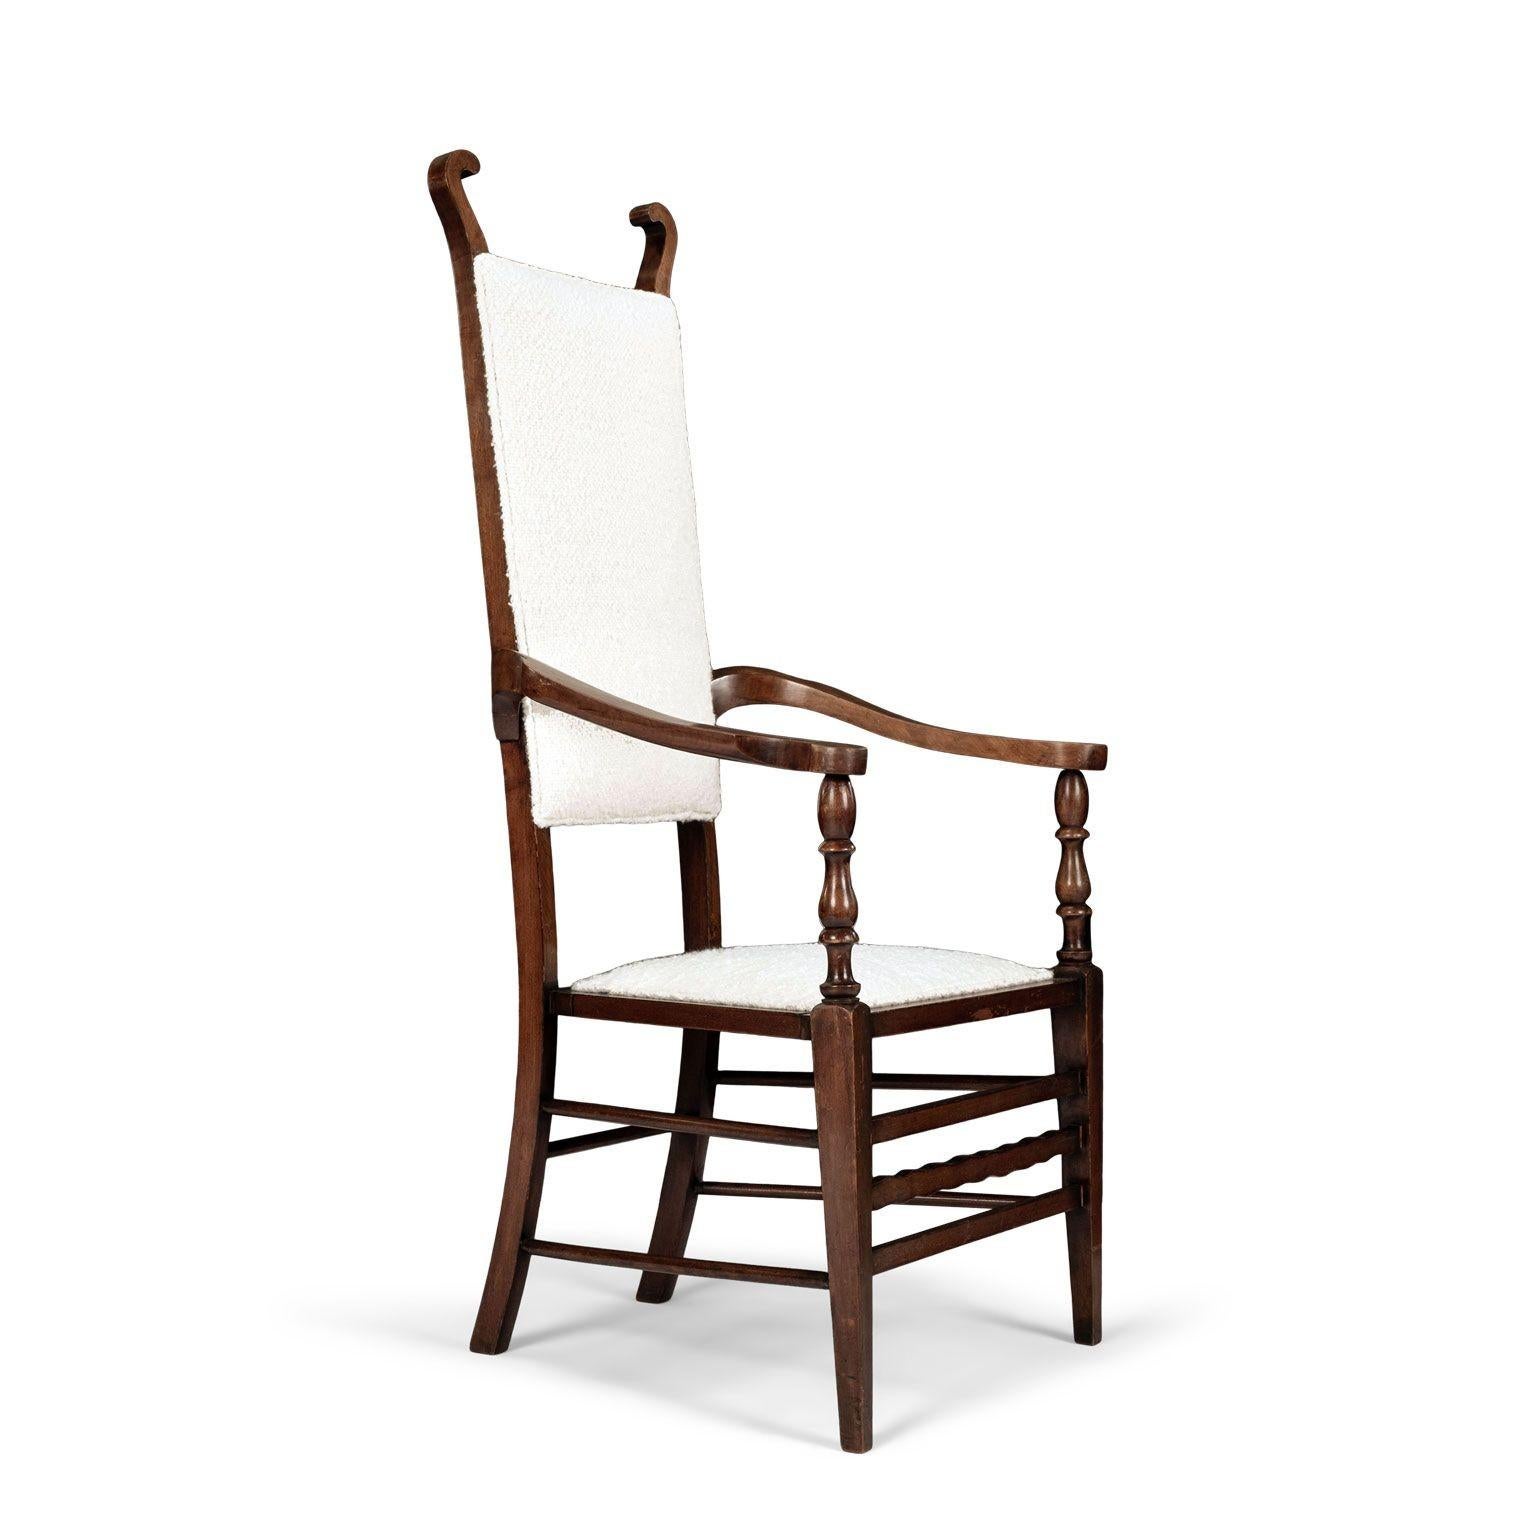 English arts and crafts brown walnut armchair, attributed to JS Henry circa 1900. Scrolled terminals atop a solid back and seat newly upholstered in off-white boucle. Flanked by outswept arms supported by turned uprights. Carved wavy front